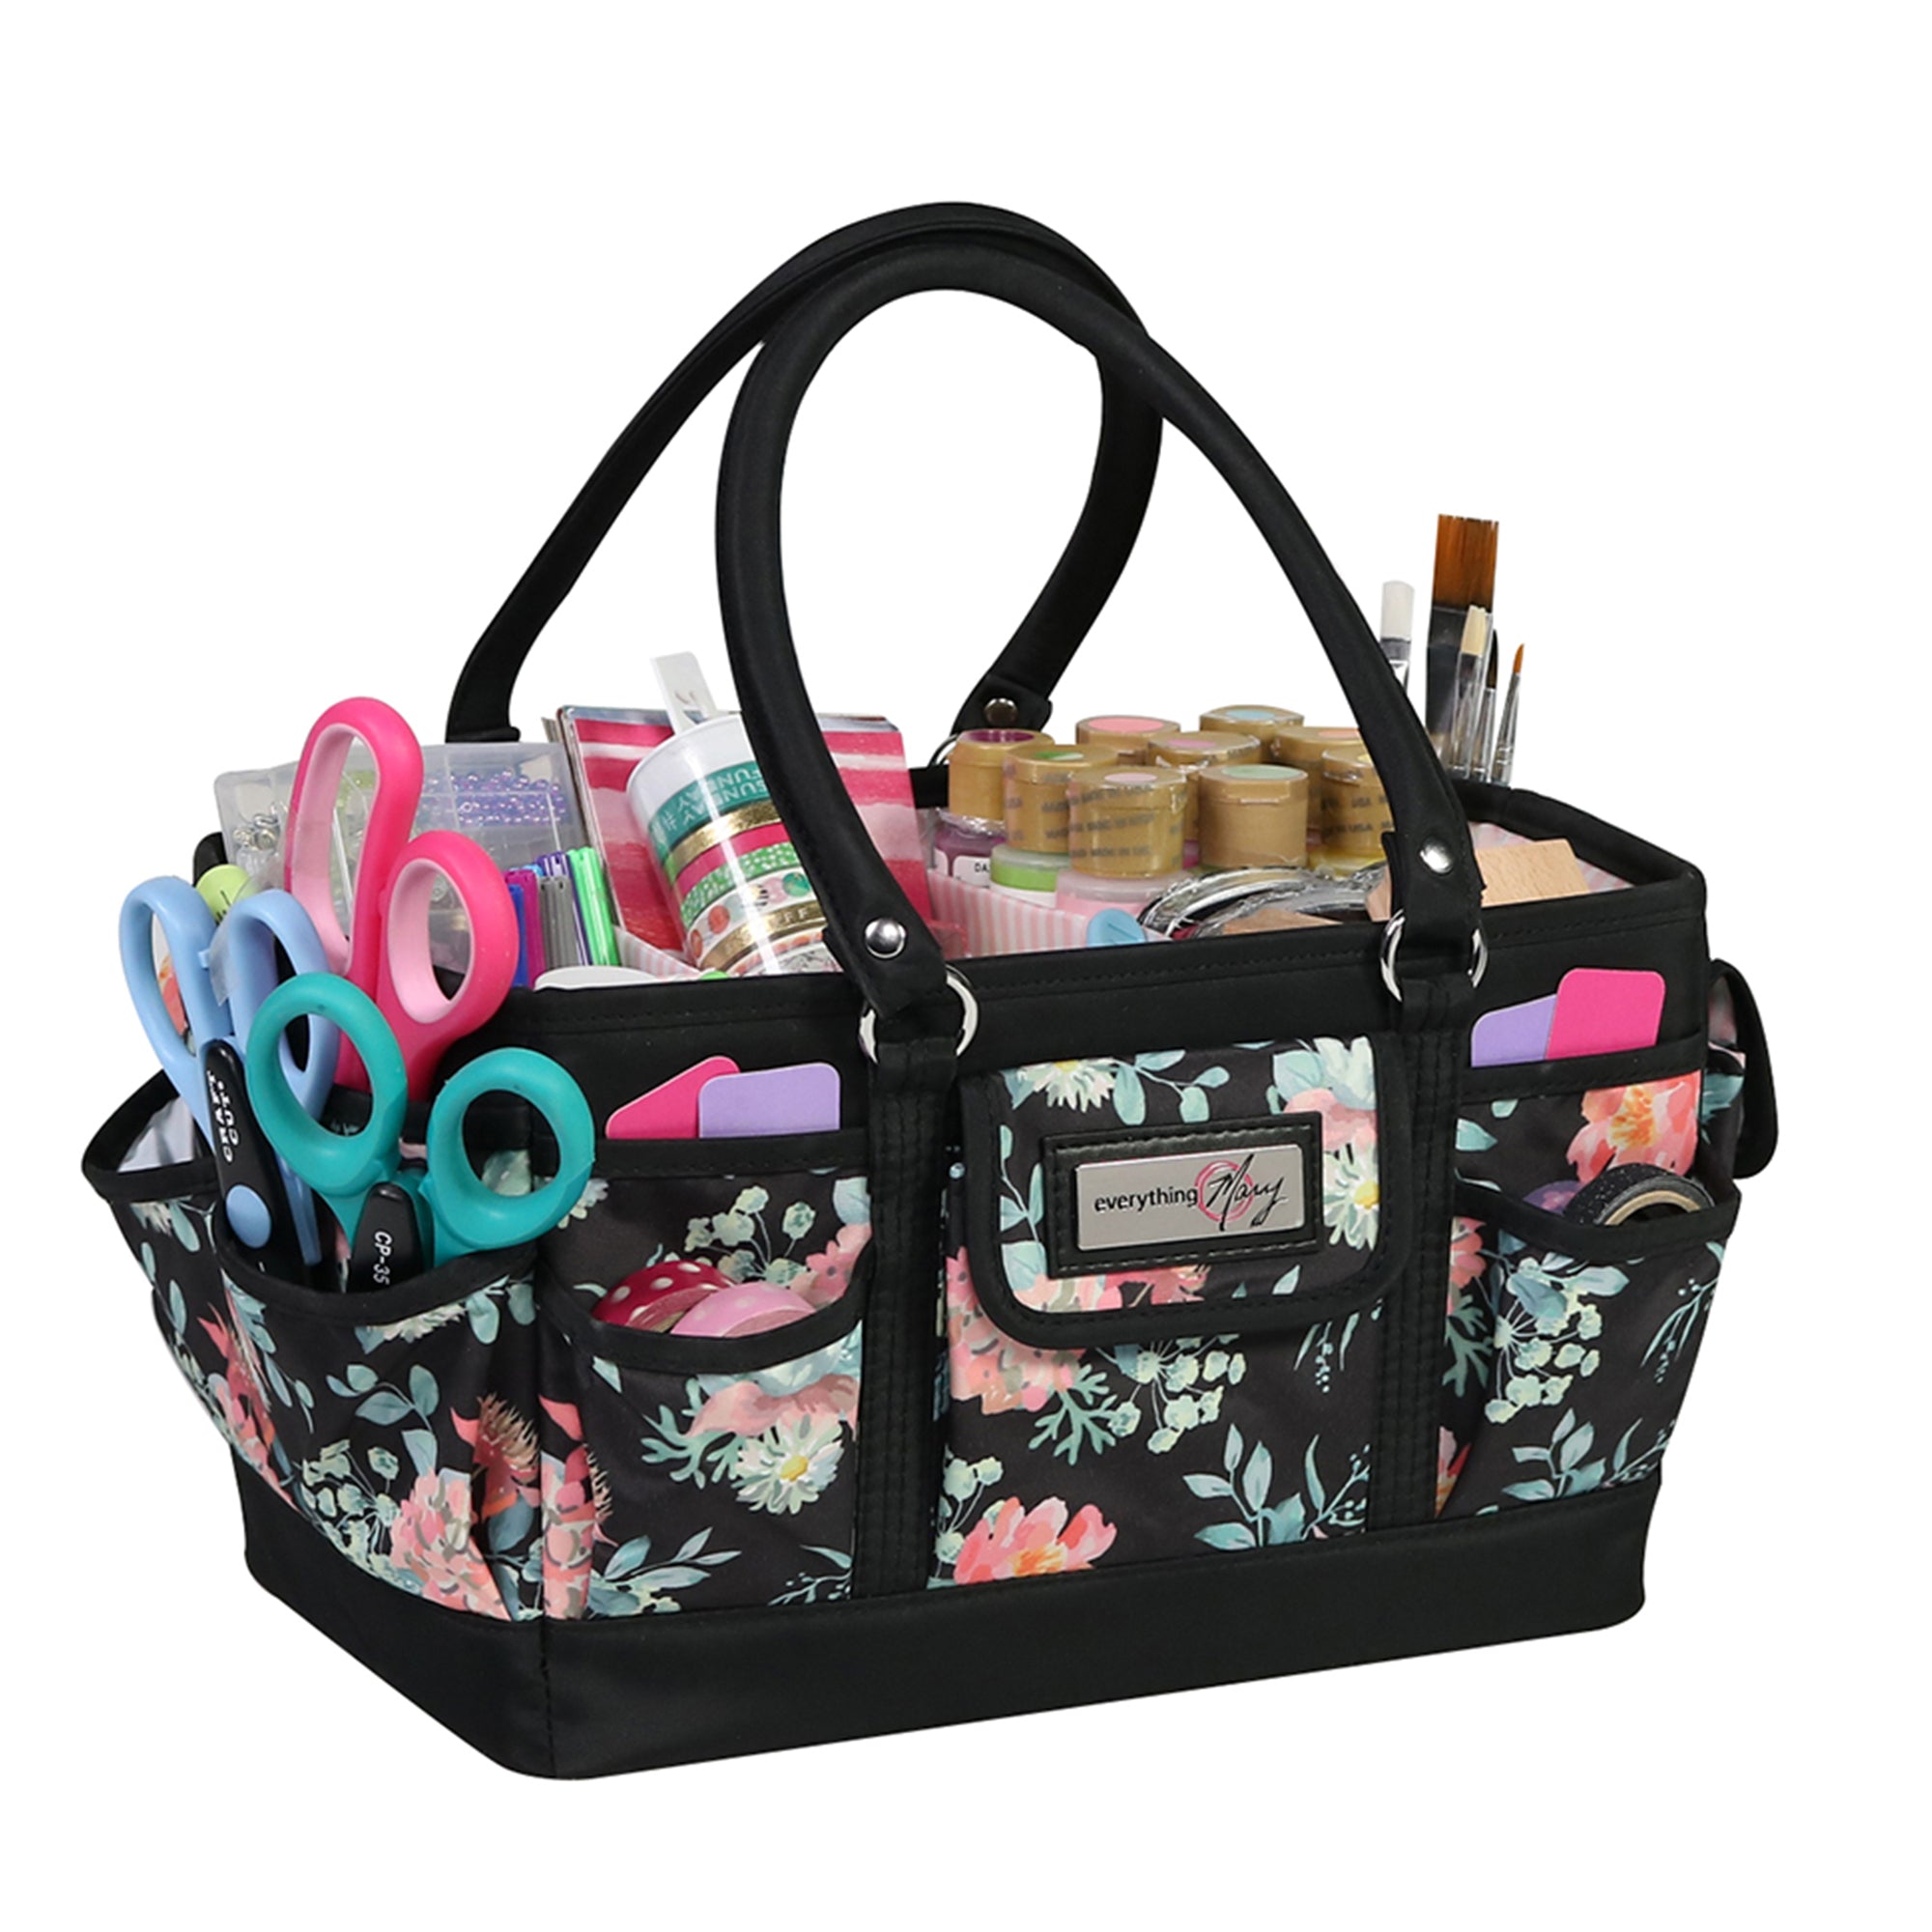 Everything Mary Craft Bag Organizer Tote, Color – Storage Art Caddy for